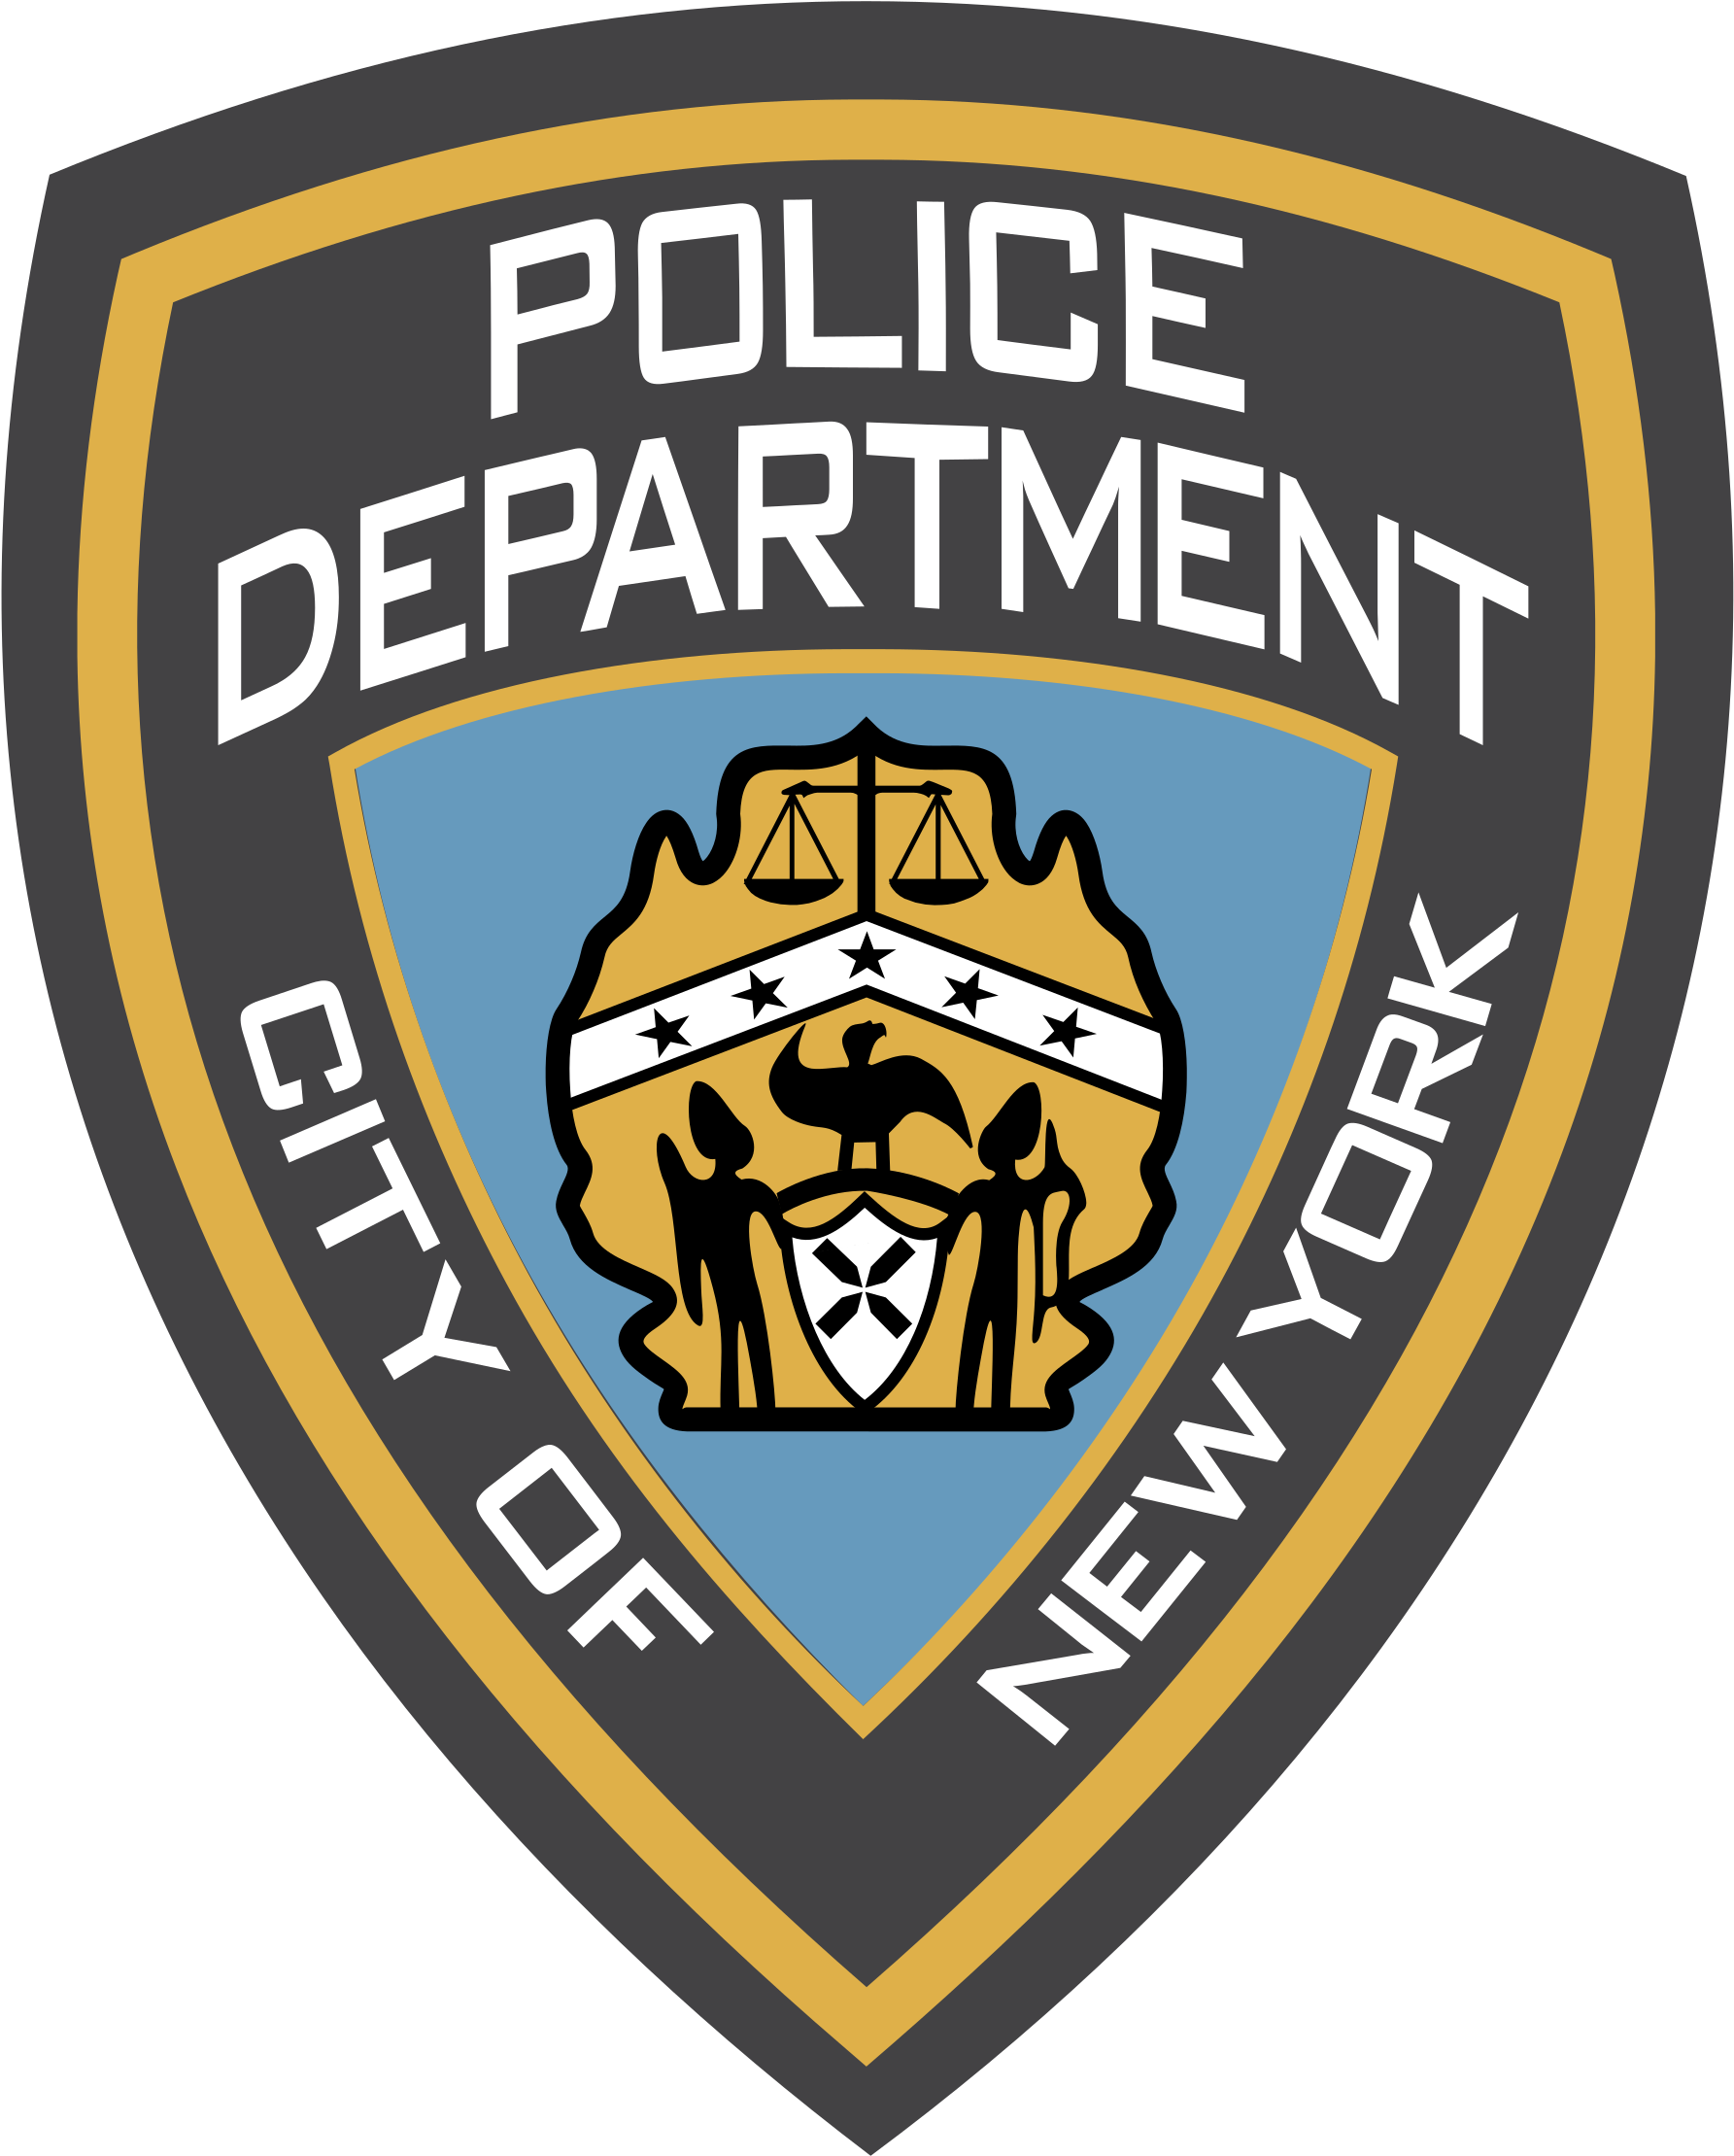 Police Department Logo - New York Department Of Corrections (2400x2400)